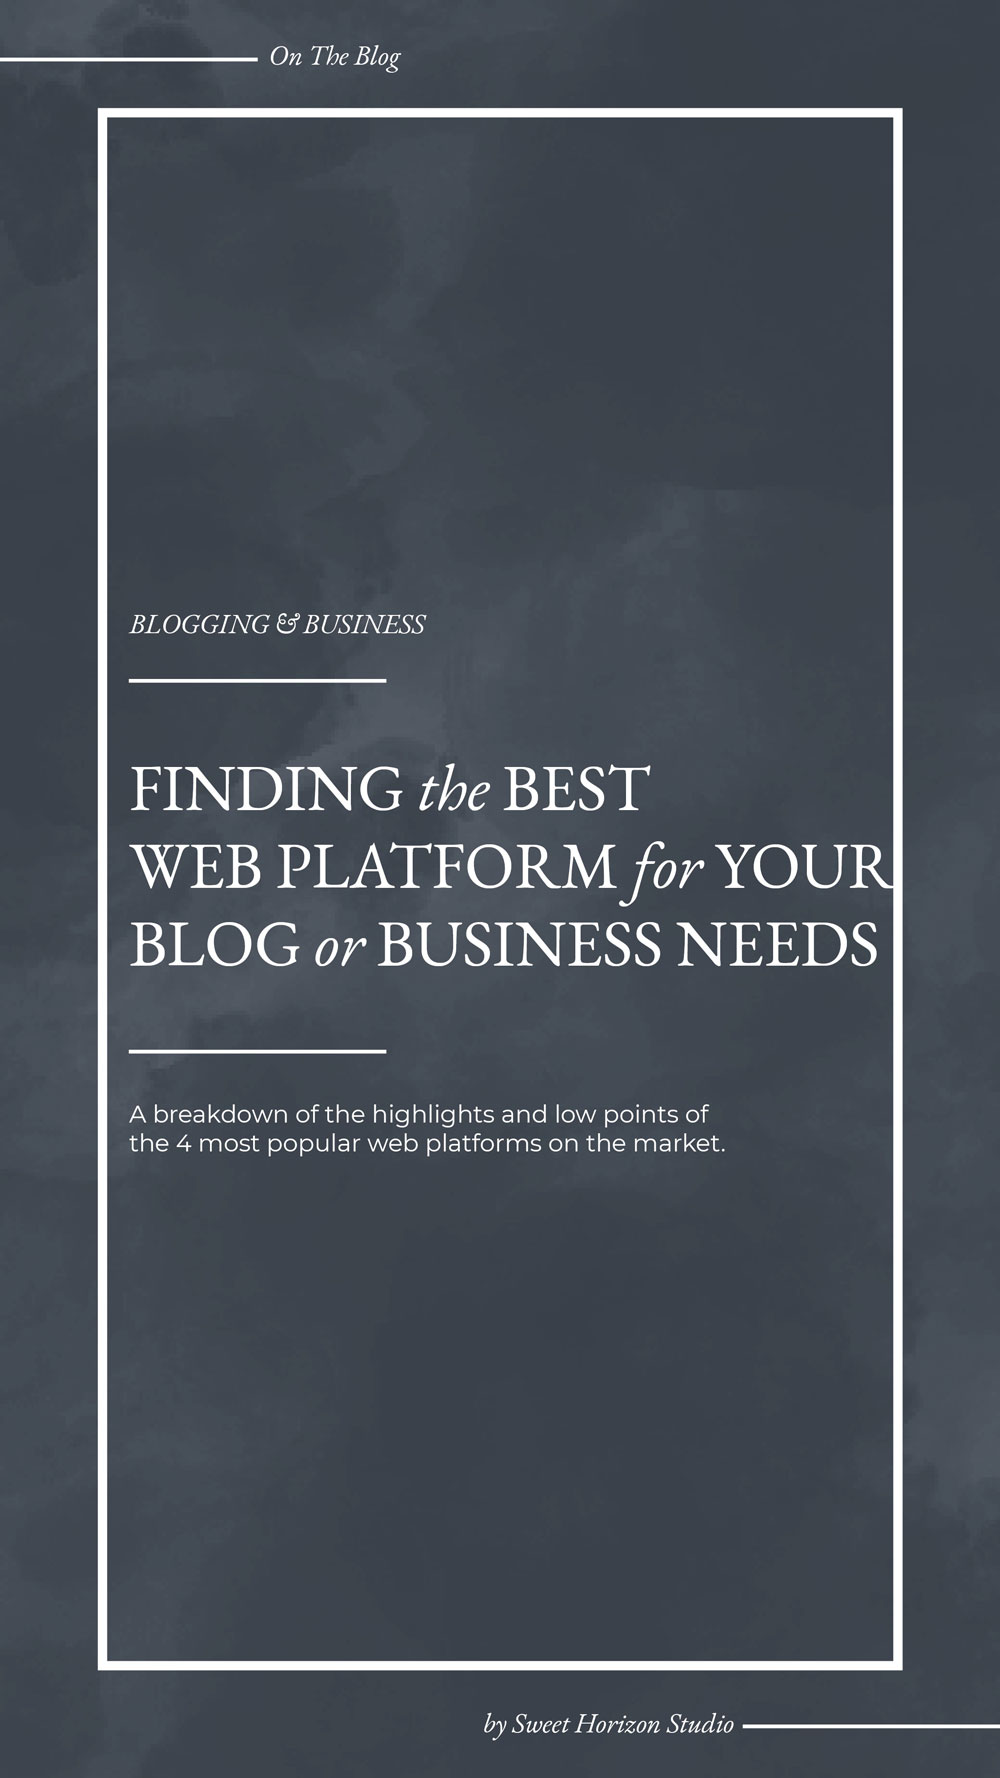 Finding the best web platform for your blog or business needs from www.sweethorizonblog.com